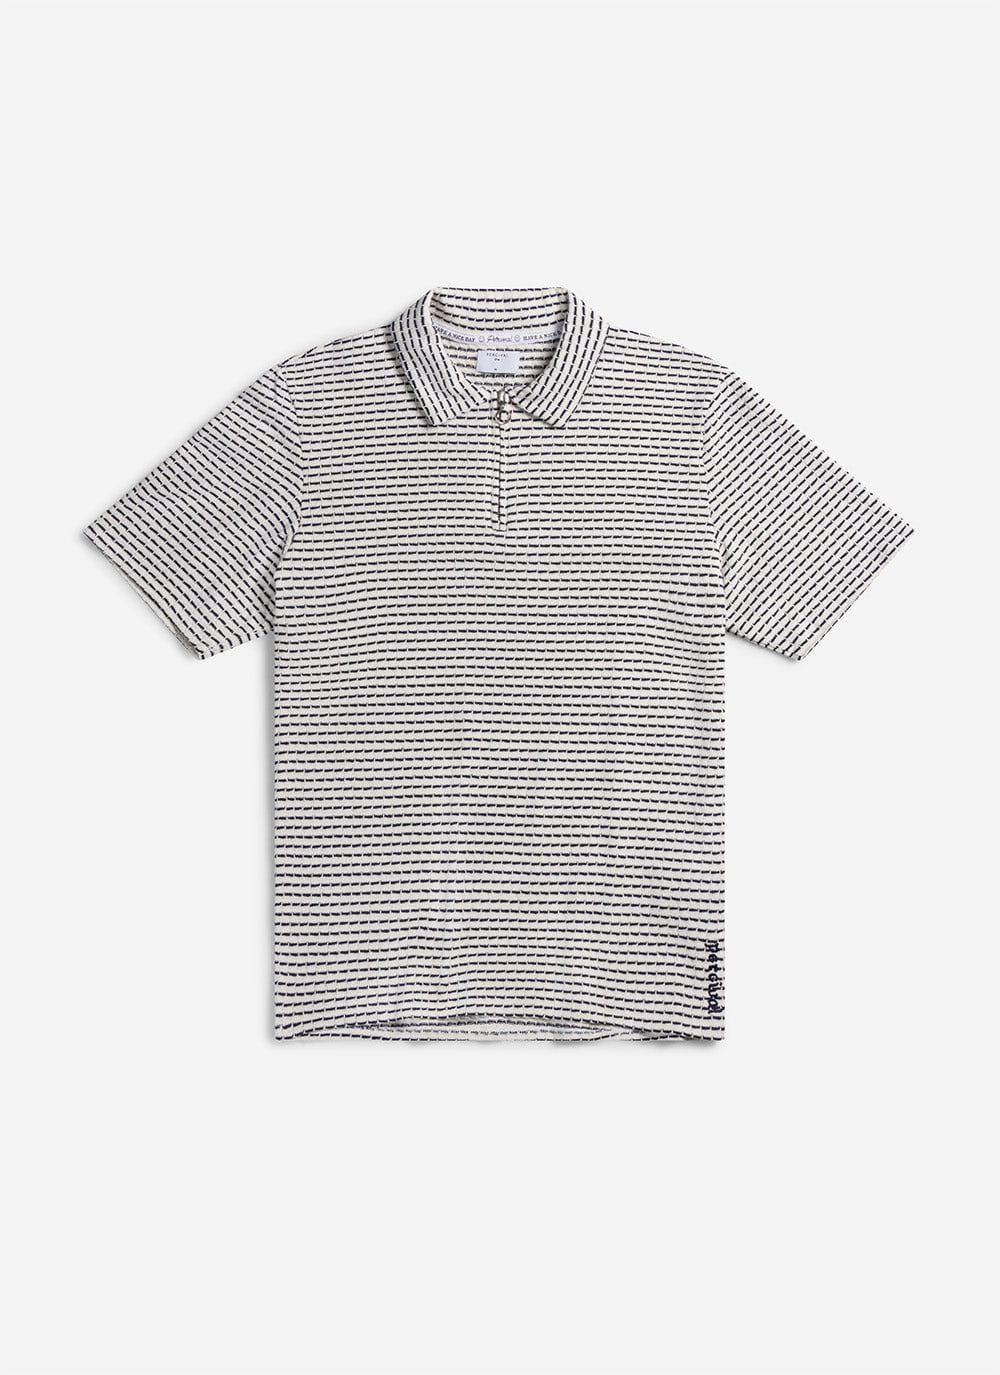 Men's Knitted Shirt with Zip Polo Collar | Cream with Navy | Percival ...